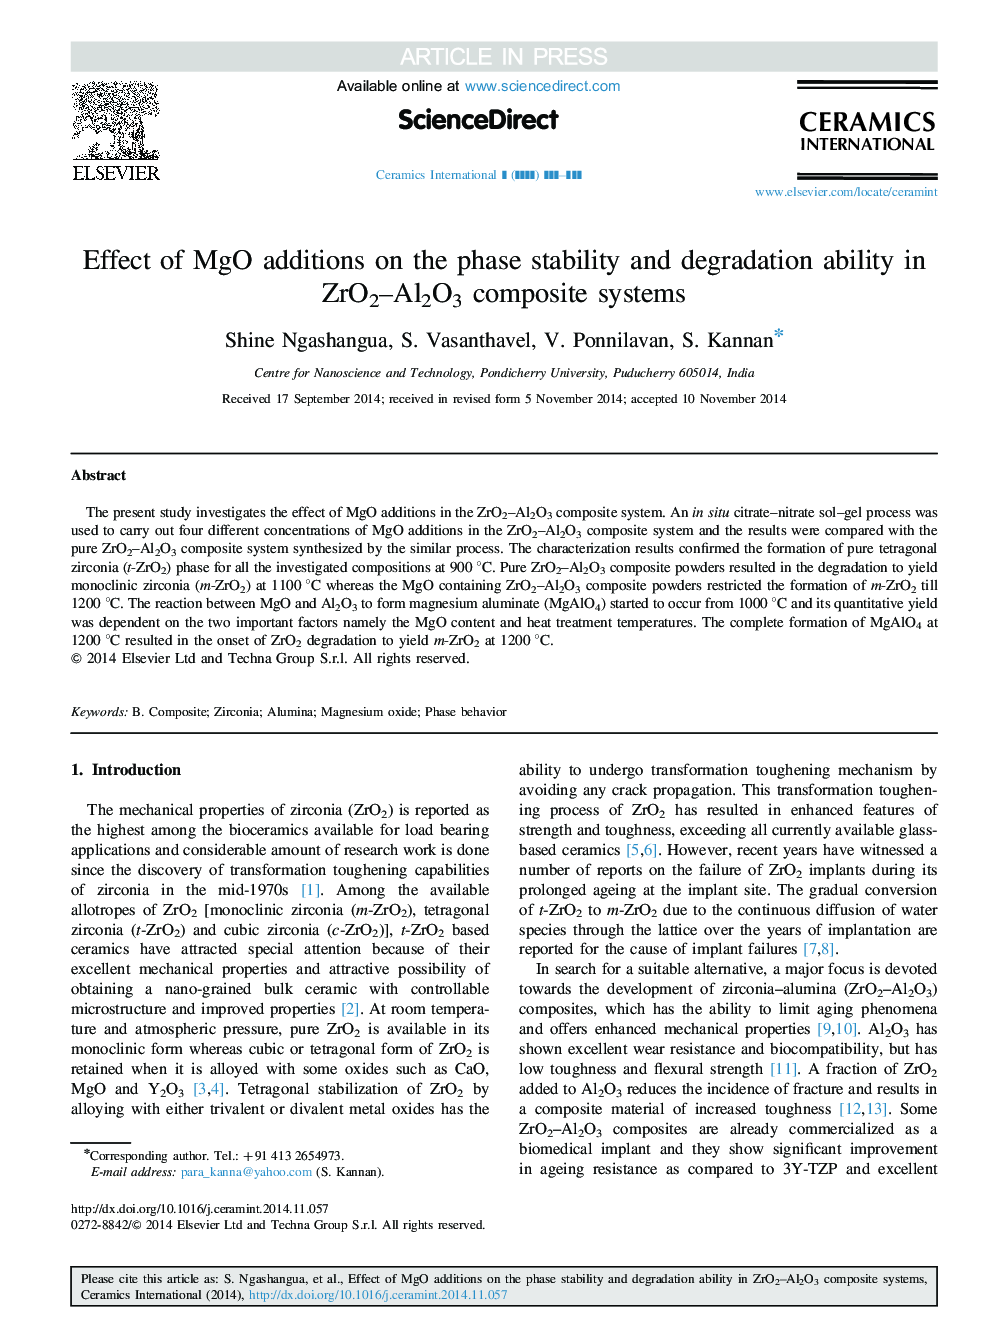 Effect of MgO additions on the phase stability and degradation ability in ZrO2-Al2O3 composite systems